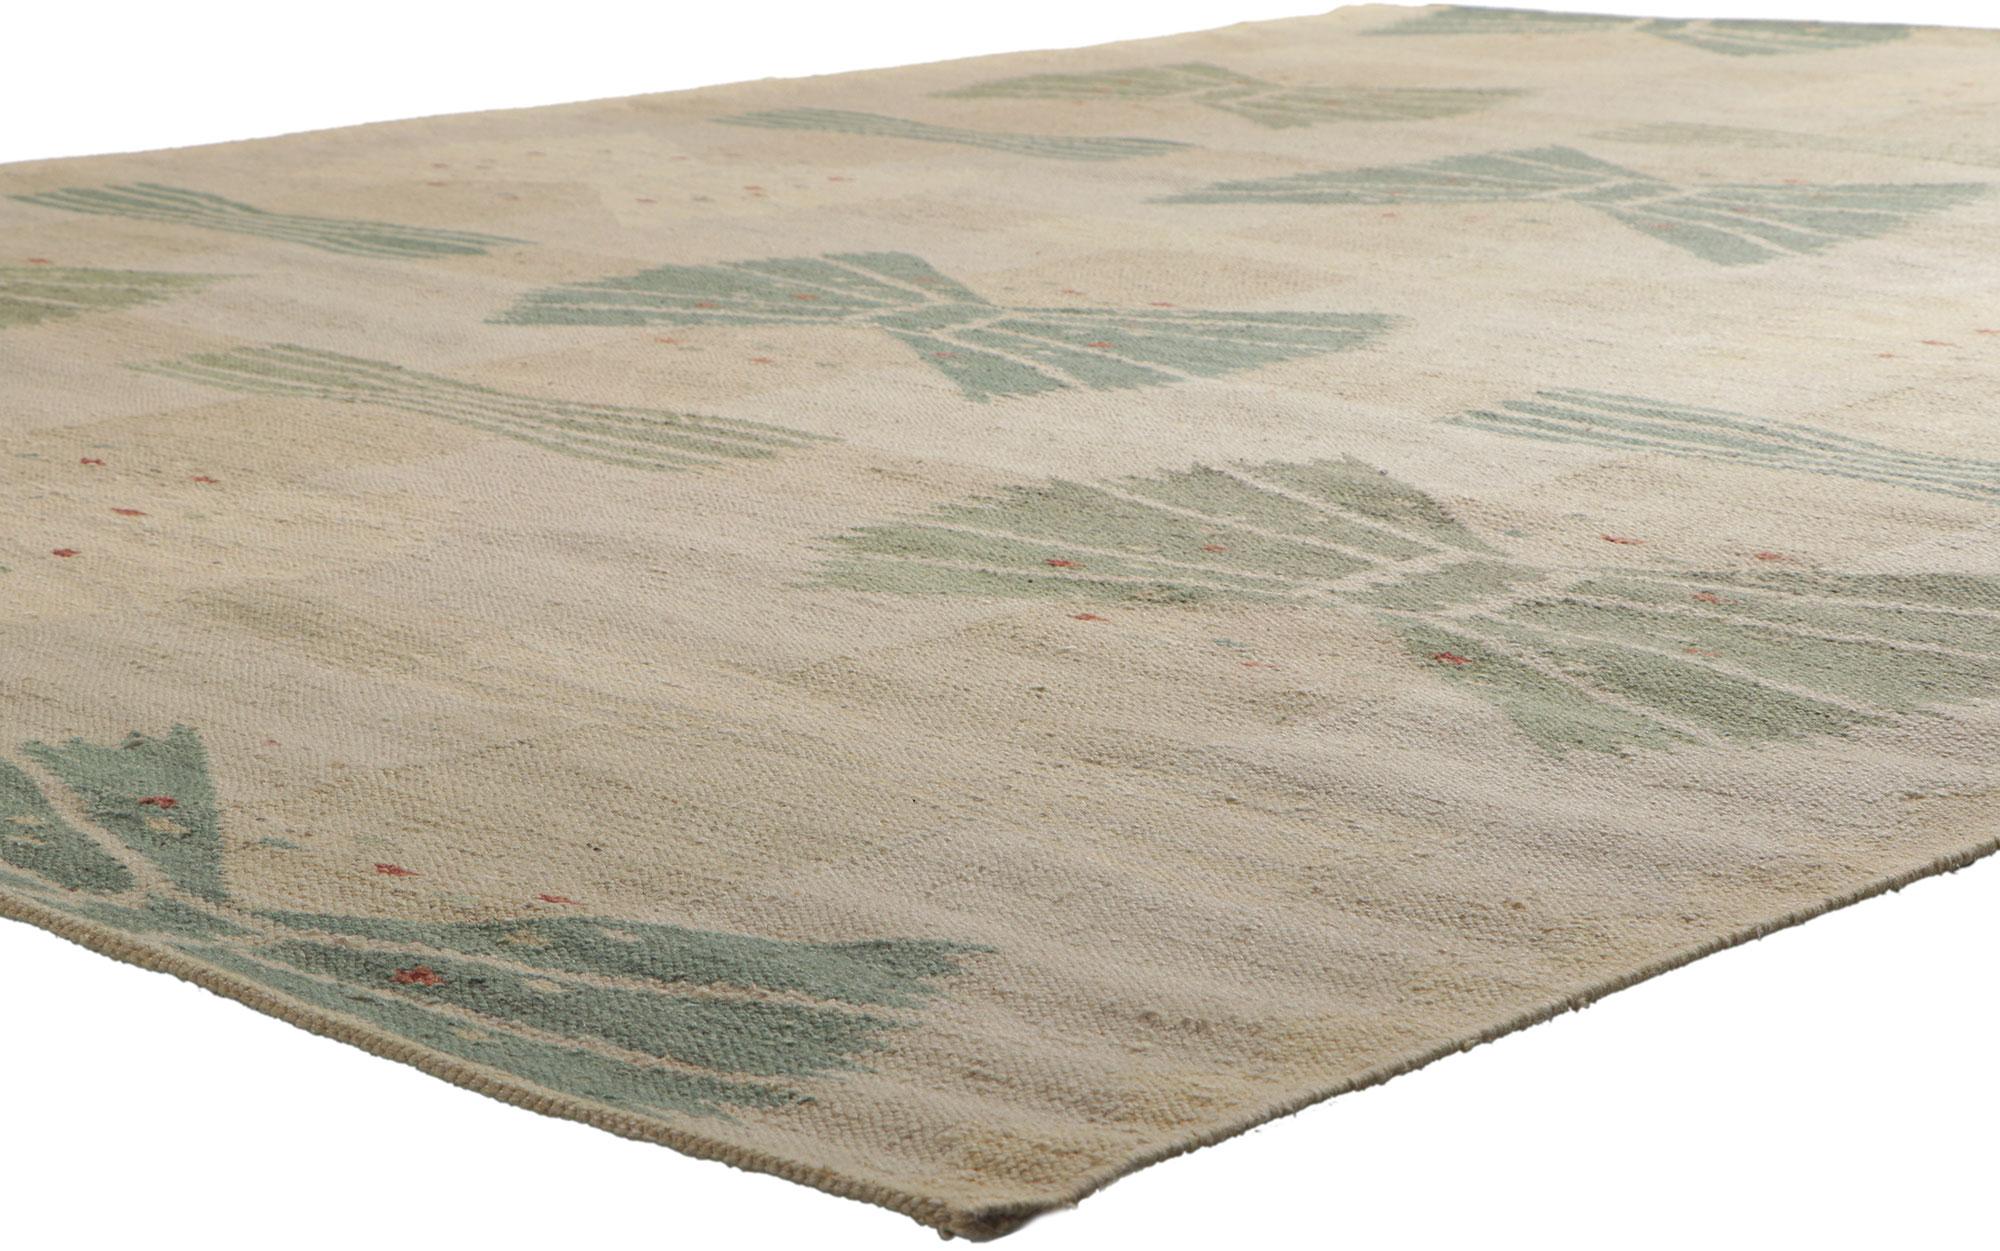 30796 New Swedish Style Kilim Rug Inspired by Barbro Nilsson and Marta Maas-Fjetterstrom 10'00 x 13'05. With its simplicity, geometric design and soft colors, this hand-woven wool Swedish inspired Kilim rug provides a feeling of cozy contentment